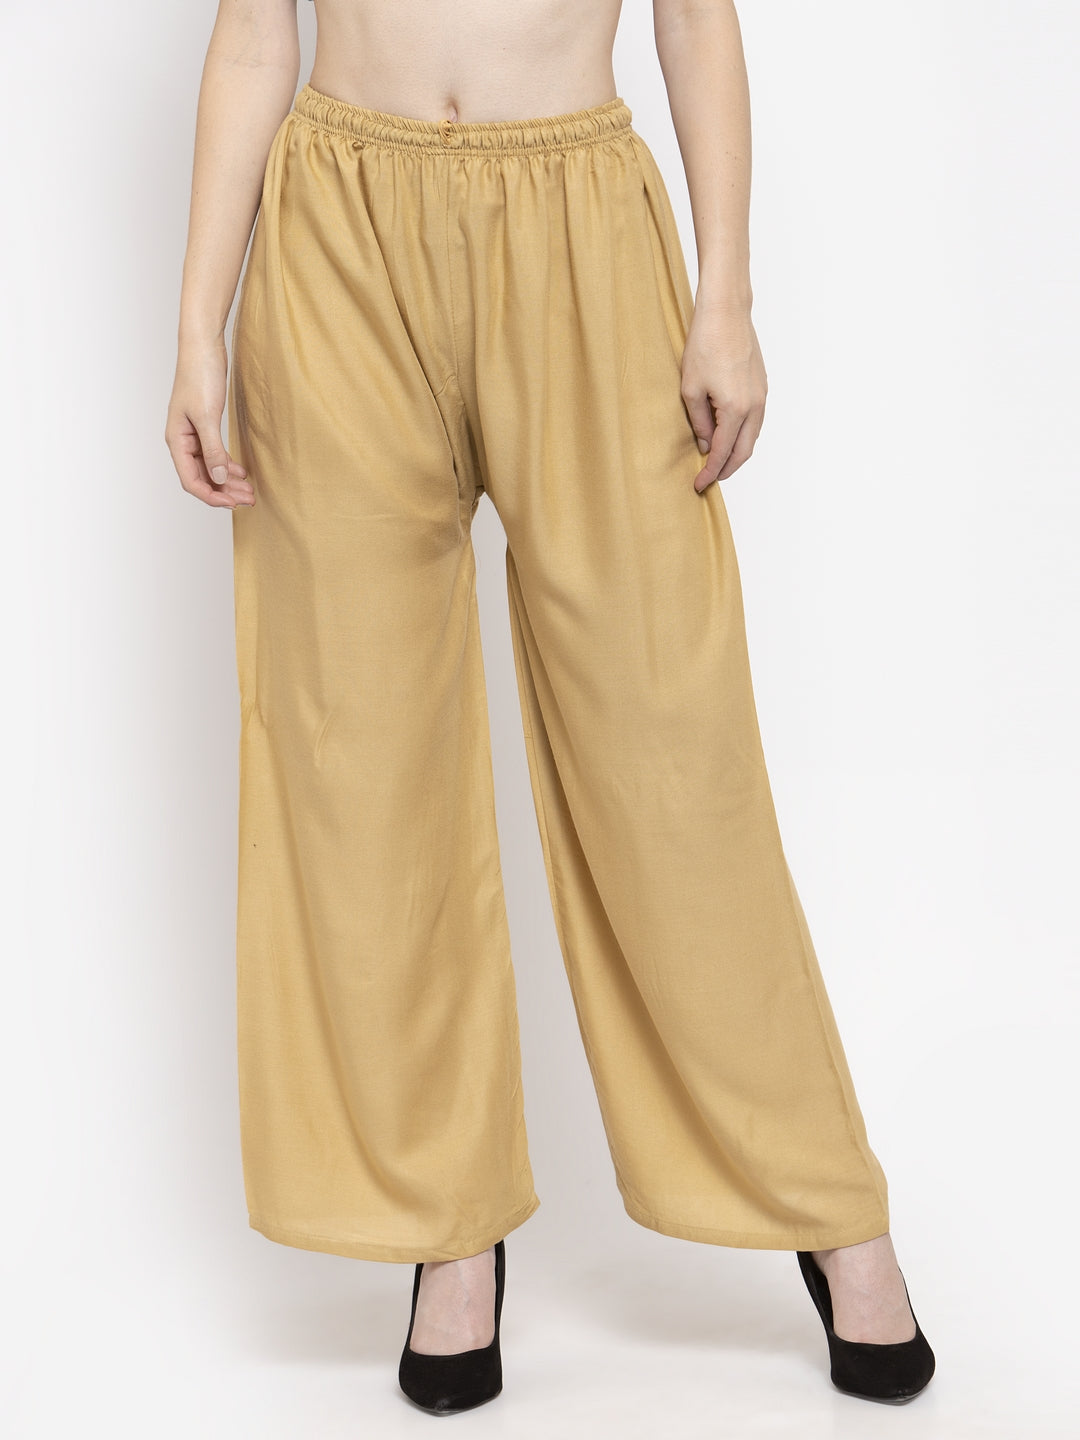 Clora Solid Off-White, Mustard & Fawn Rayon Palazzo (Pack Of 3)